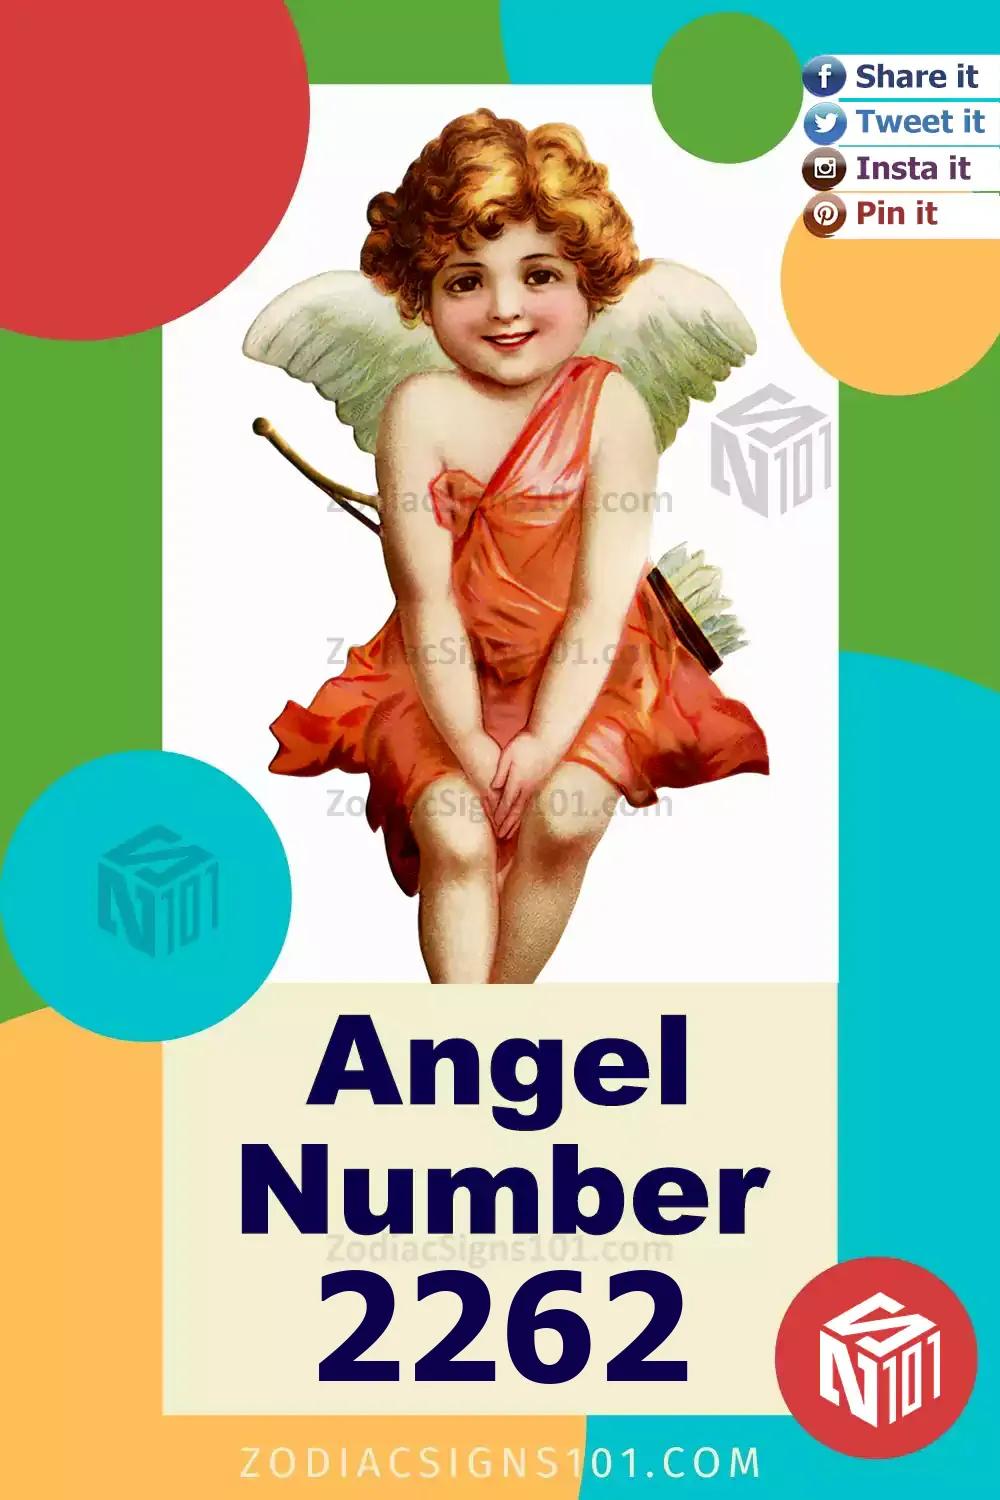 2262 Angel Number Spiritual Meaning And Significance - ZodiacSigns101